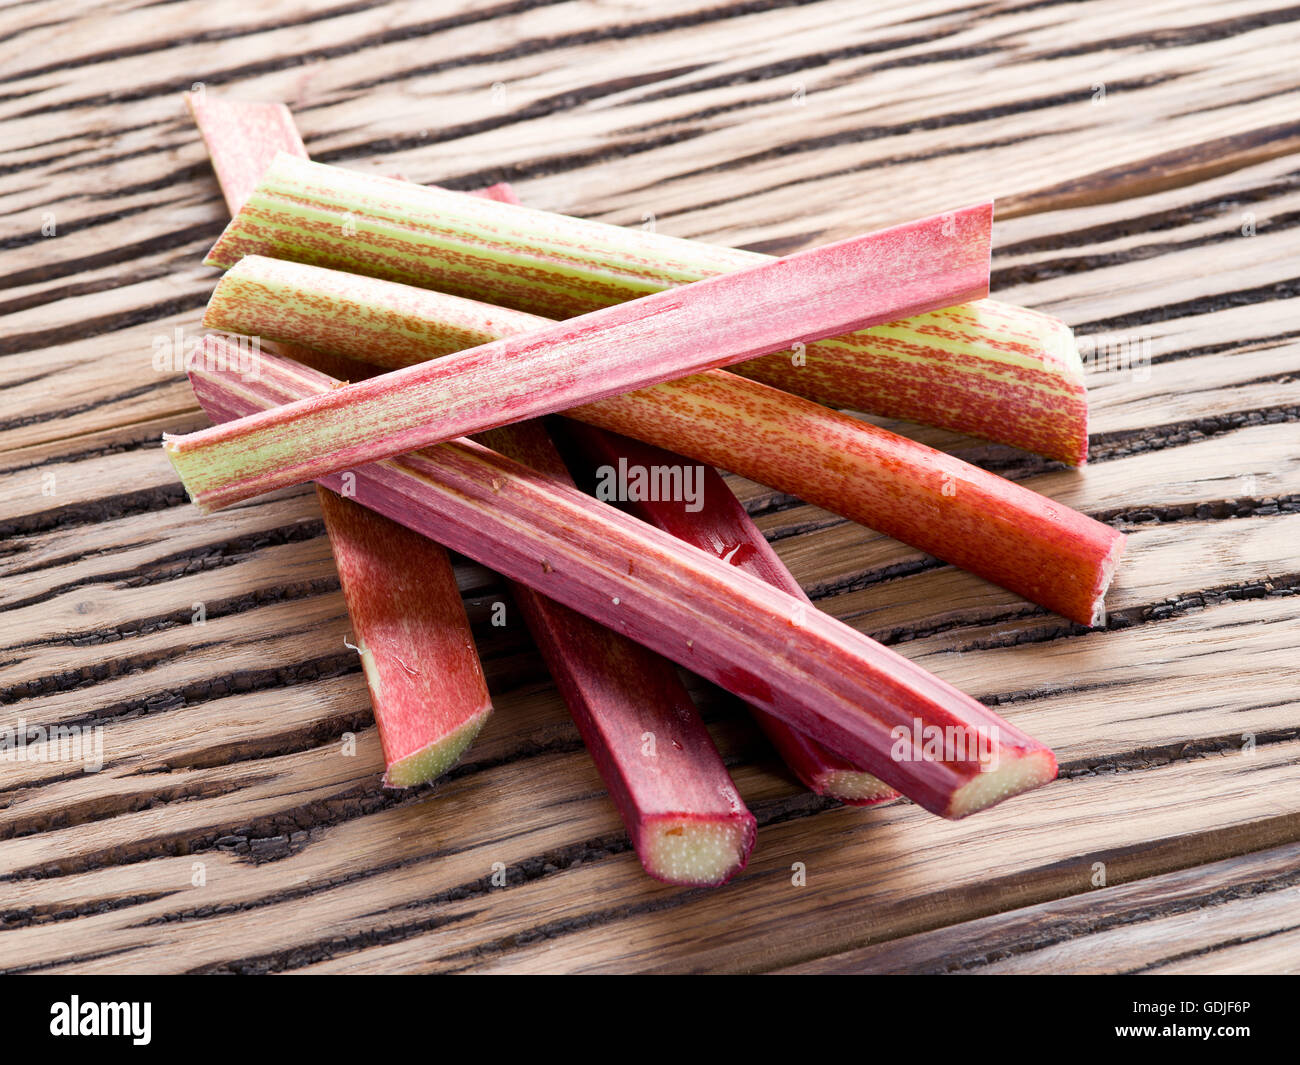 Rhubarb stalks on the wooden table. Stock Photo